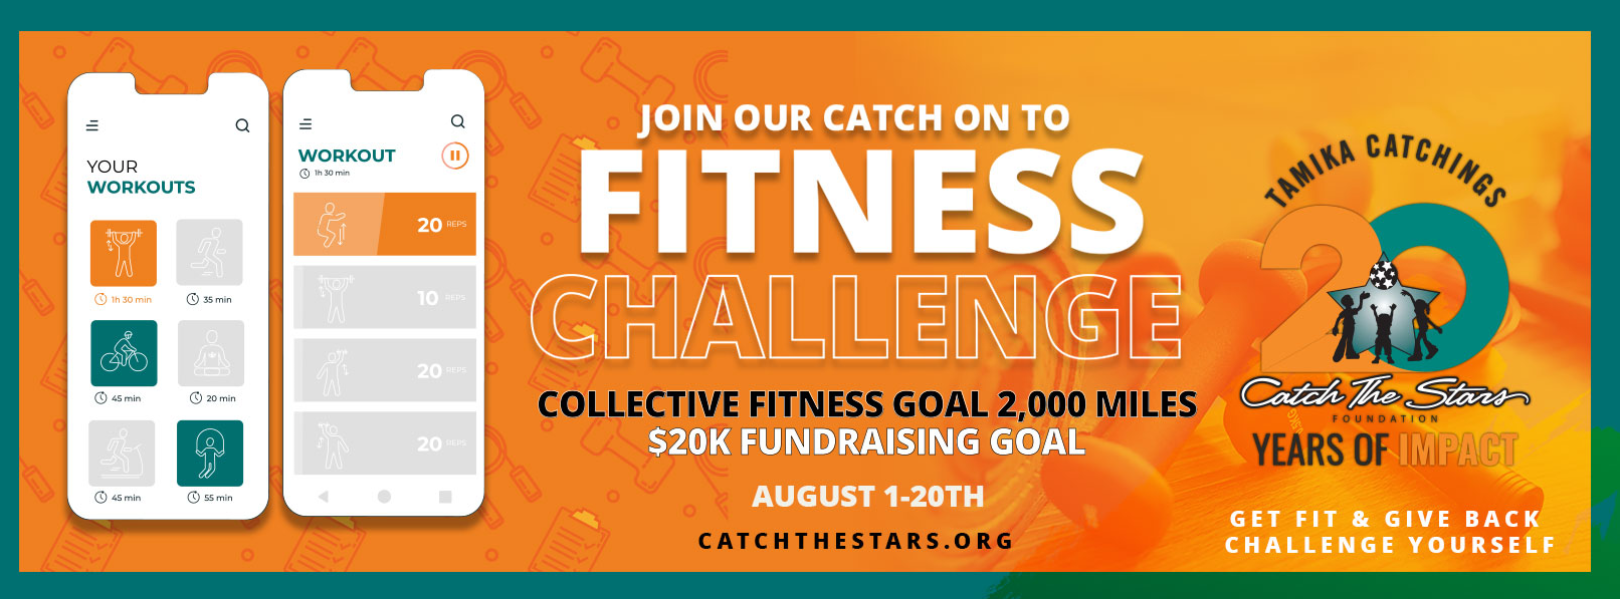 Catch on to Fitness Challenge